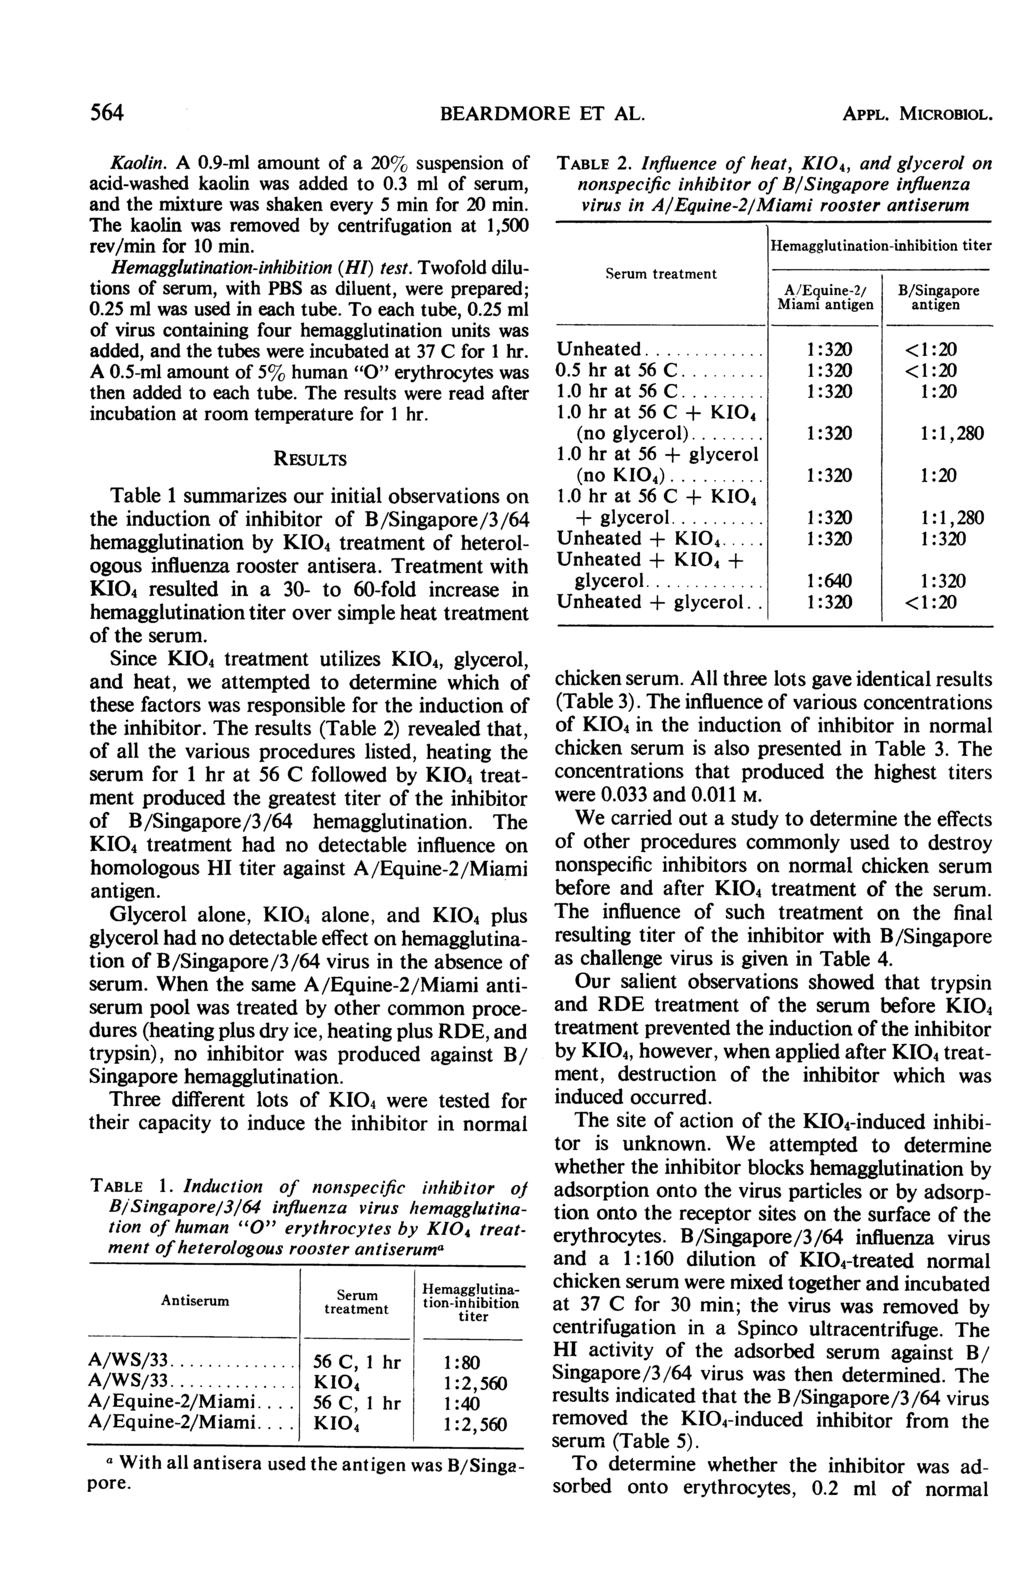 564 BEARDMORE ET AL. APPL. MICROBIOL. Kaolin. A 0.9-ml amount of a 20% suspension of acid-washed kaolin was added to 0.3 ml of serum, and the mixture was shaken every 5 min for 20 min.